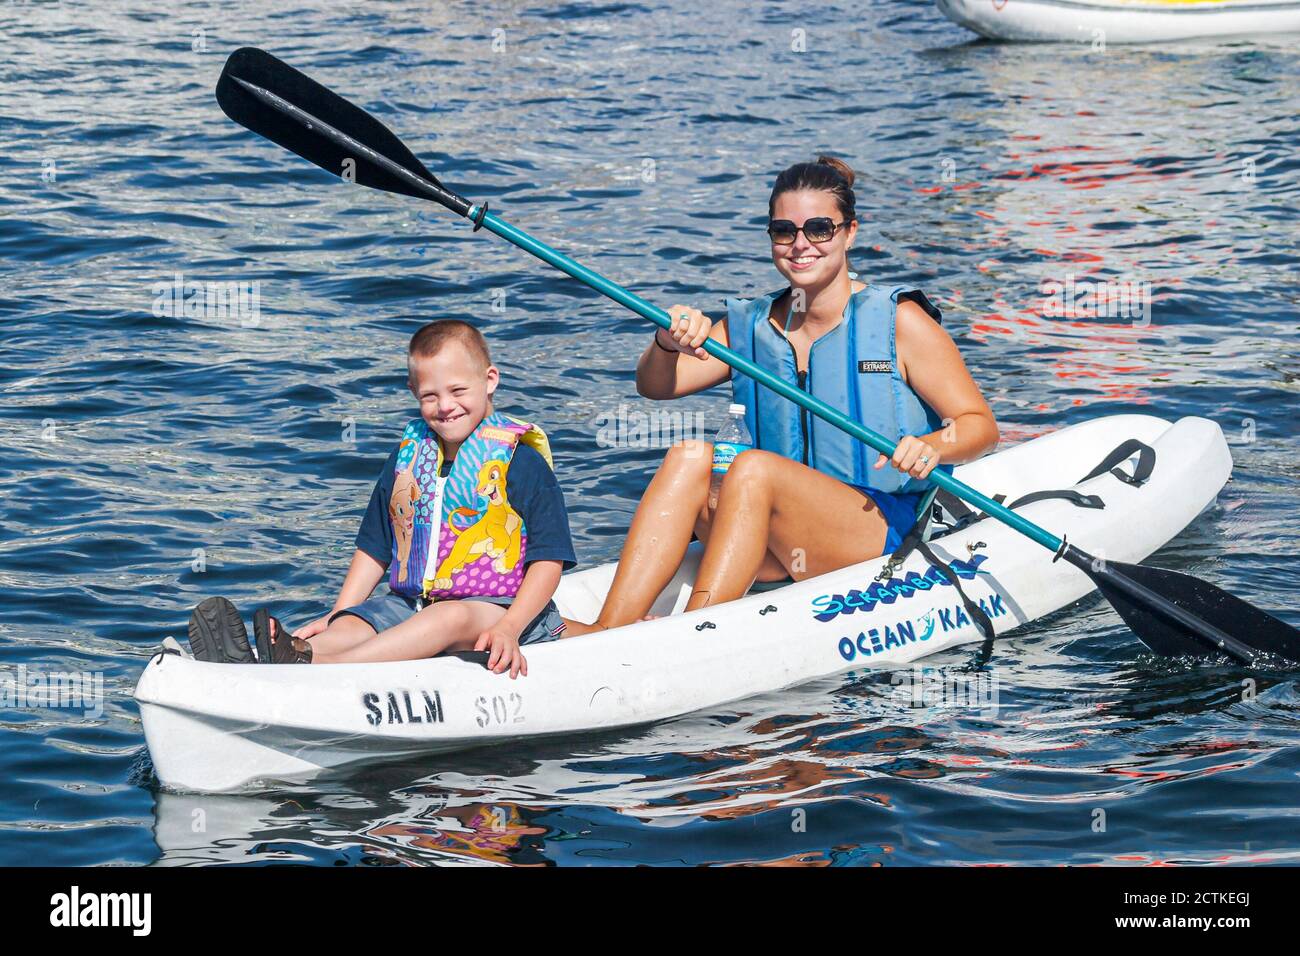 Florida Key Biscayne Coconut Grove Shake A Leg Program,student students disabled handicapped special needs,kayaking specialized kayak boy boys woman f Stock Photo